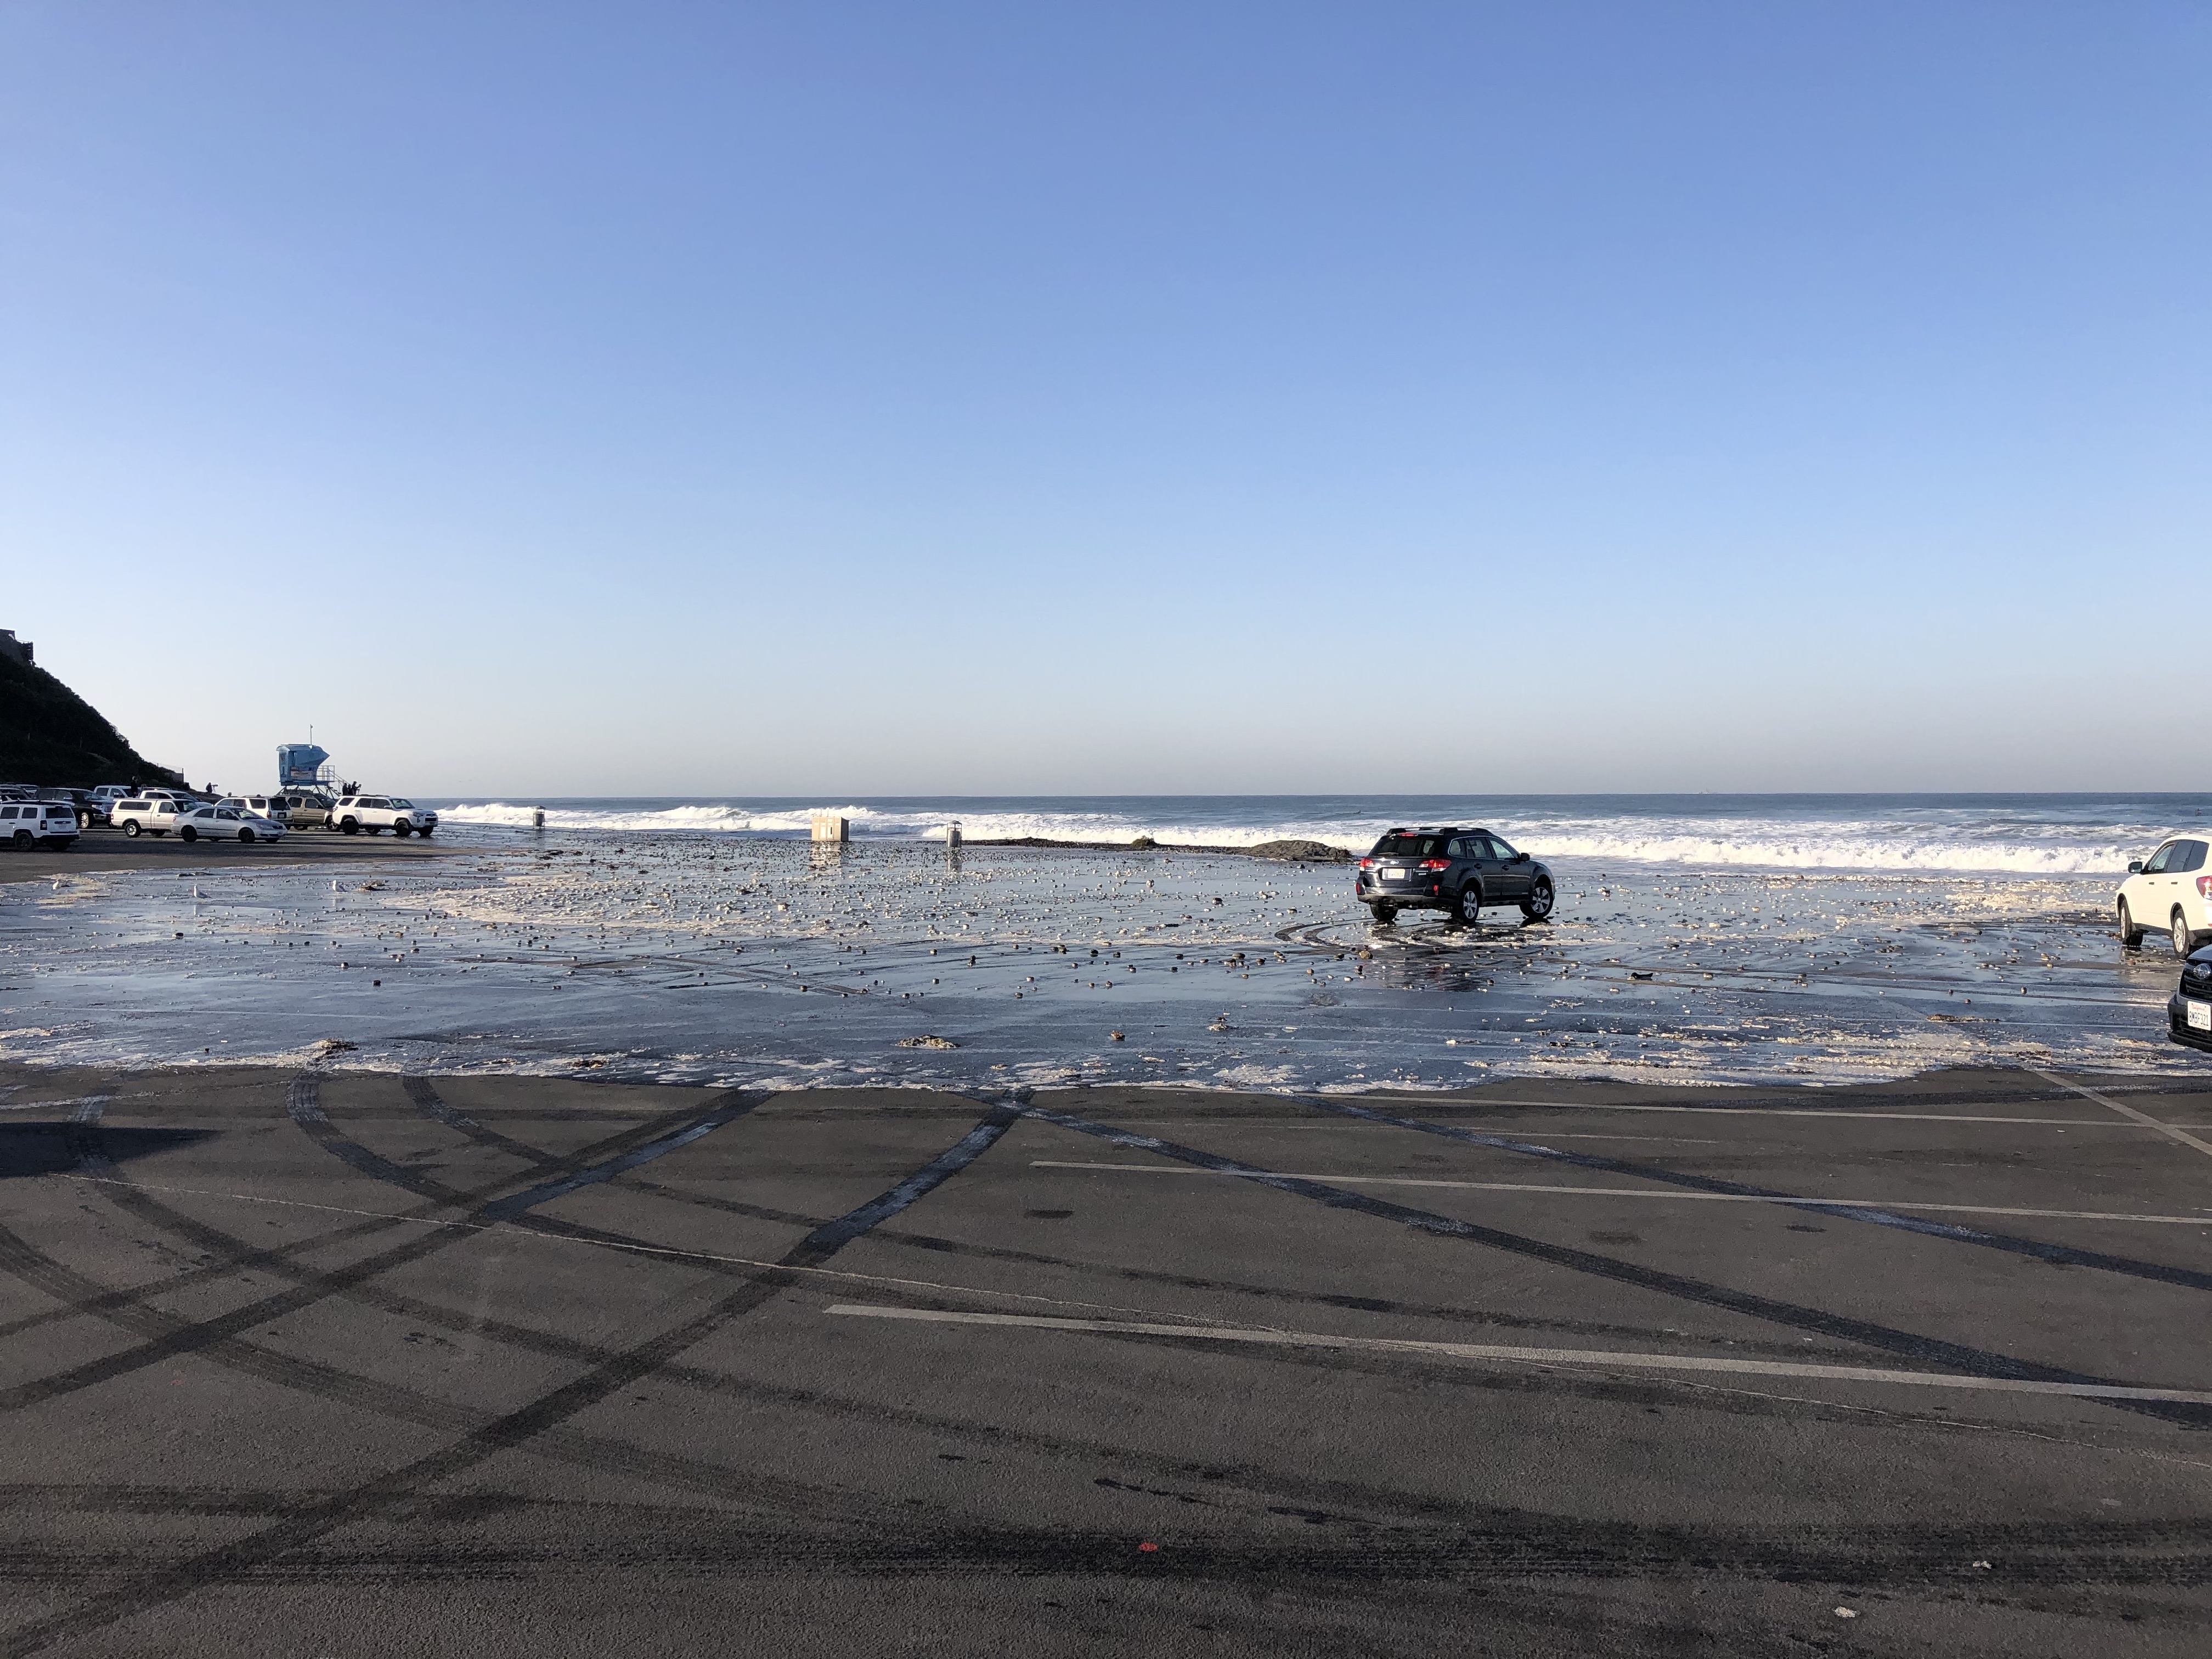 image of flooded beach parking lot caused by combined high tide and moderate swelll